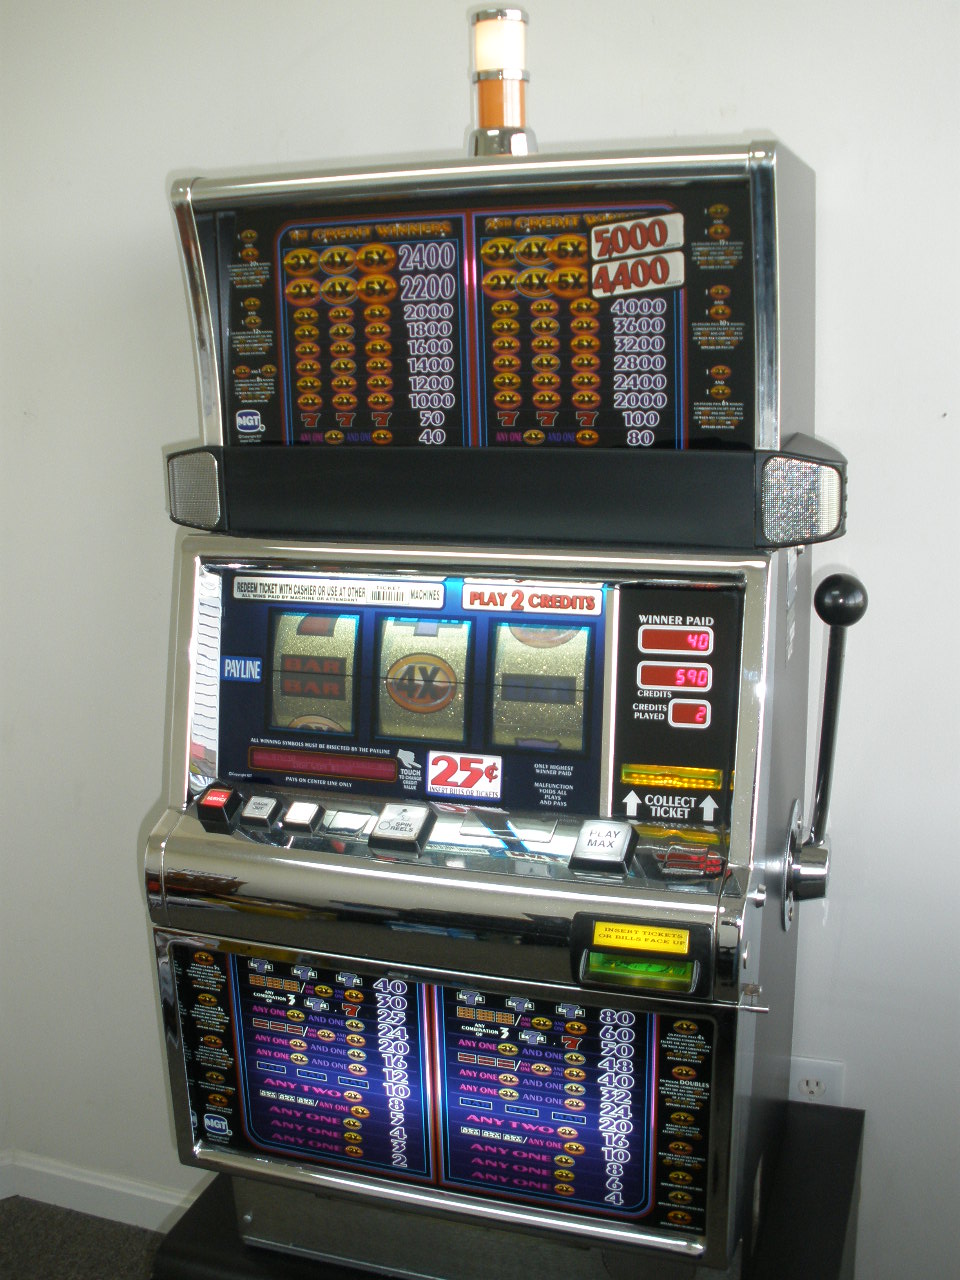 IGT 2X3X4X5X TIMES PAY S2000 SLOT MACHINE For Sale • Gambler's Oasis USA